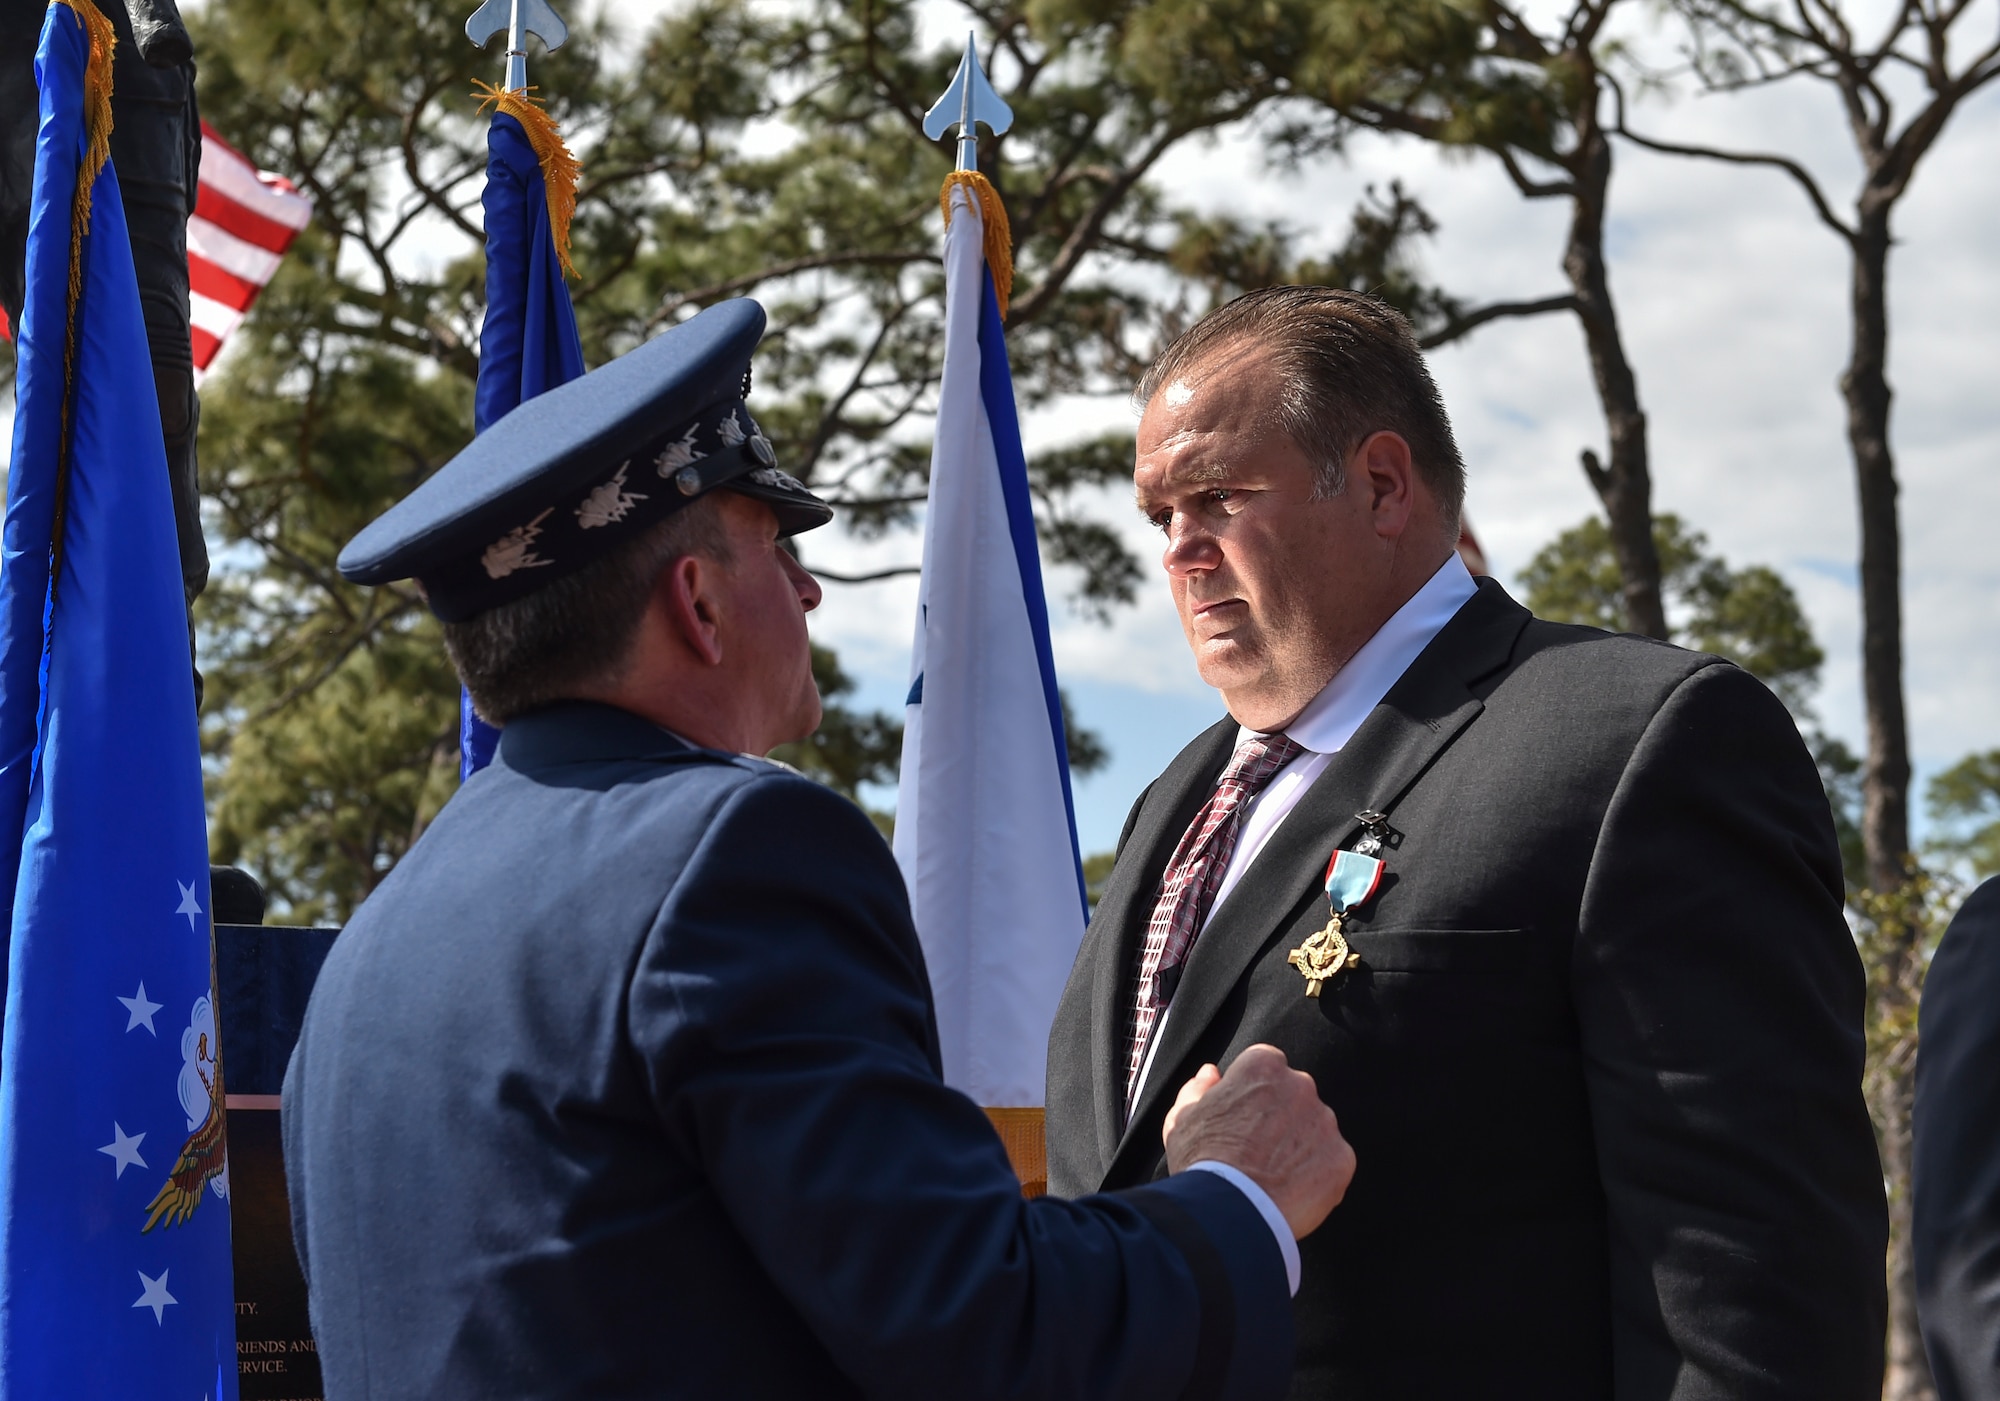 Chief of Staff of the Air Force, Gen. David L. Goldfein, presents Master Sgt. (Ret.) Keary Miller, a retired Special Tactics pararescueman, the Air Force Cross at Hurlburt Field, April 20, 2017. For the first time in Air Force history, two Airmen were simultaneously awarded the service’s highest medal for valorous action in combat. Miller, from the Air National Guard’s 123rd Special Tactics Squadron, and Chris Baradat, a staff sergeant combat controller at the time, both received Silver Star medals for their actions in combat, which were upgraded after a service-wide review. (U.S. Air Force photo by Senior Airman Ryan Conroy) 